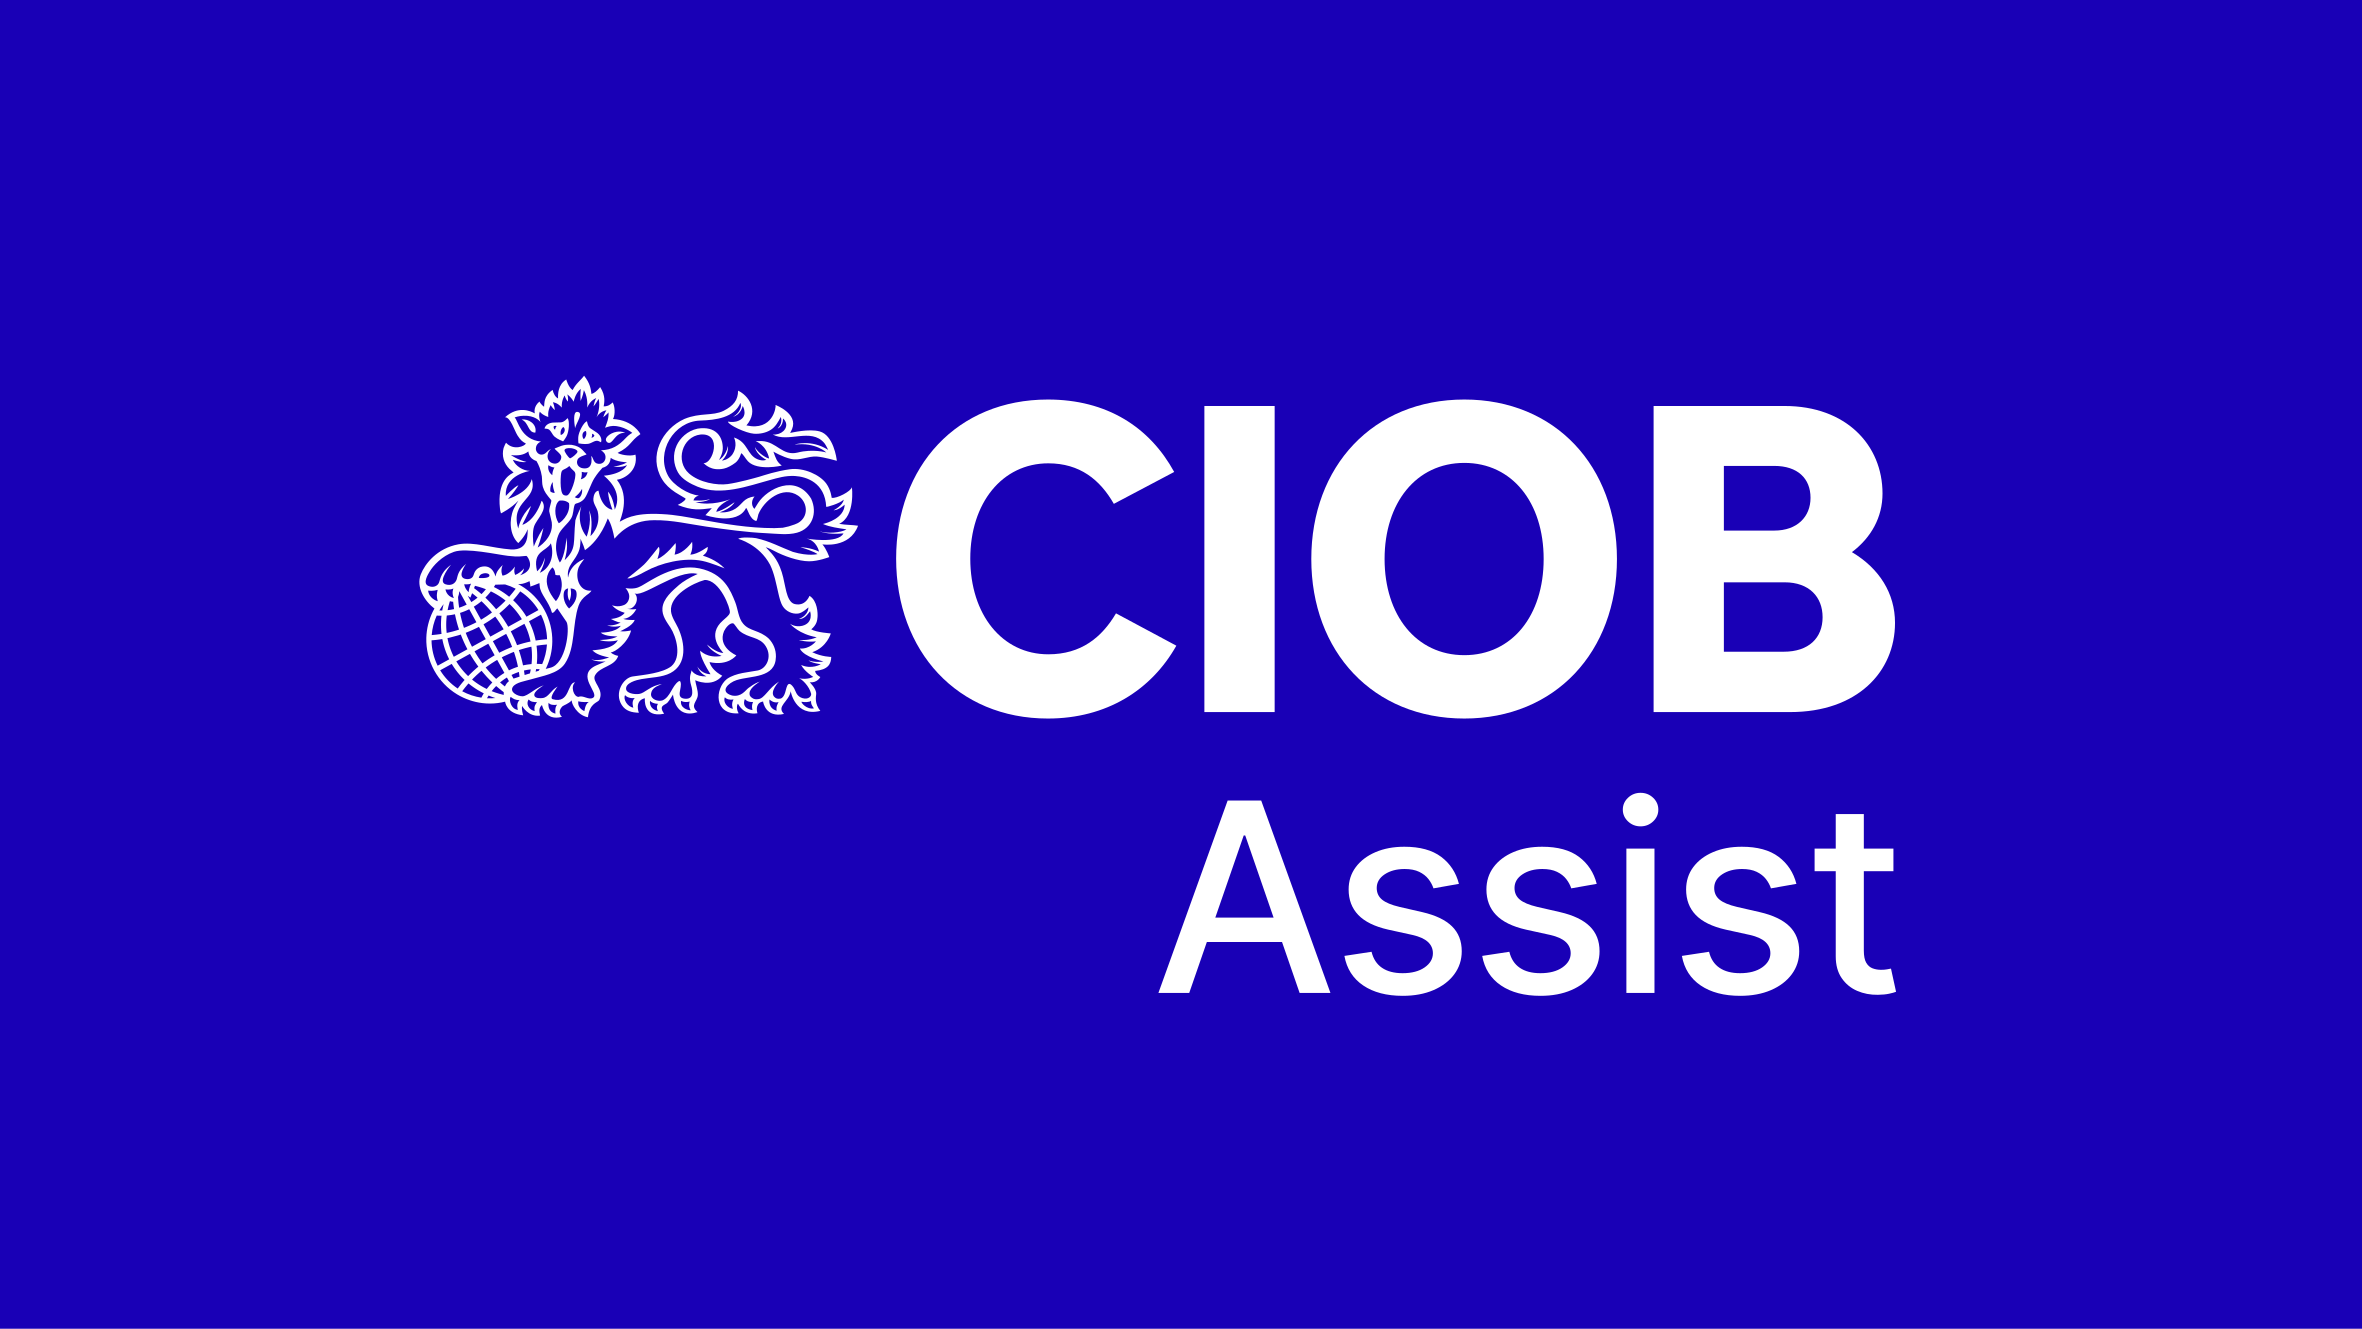 Emma McKay: CIOB Assist - for when construction professionals need a helping hand